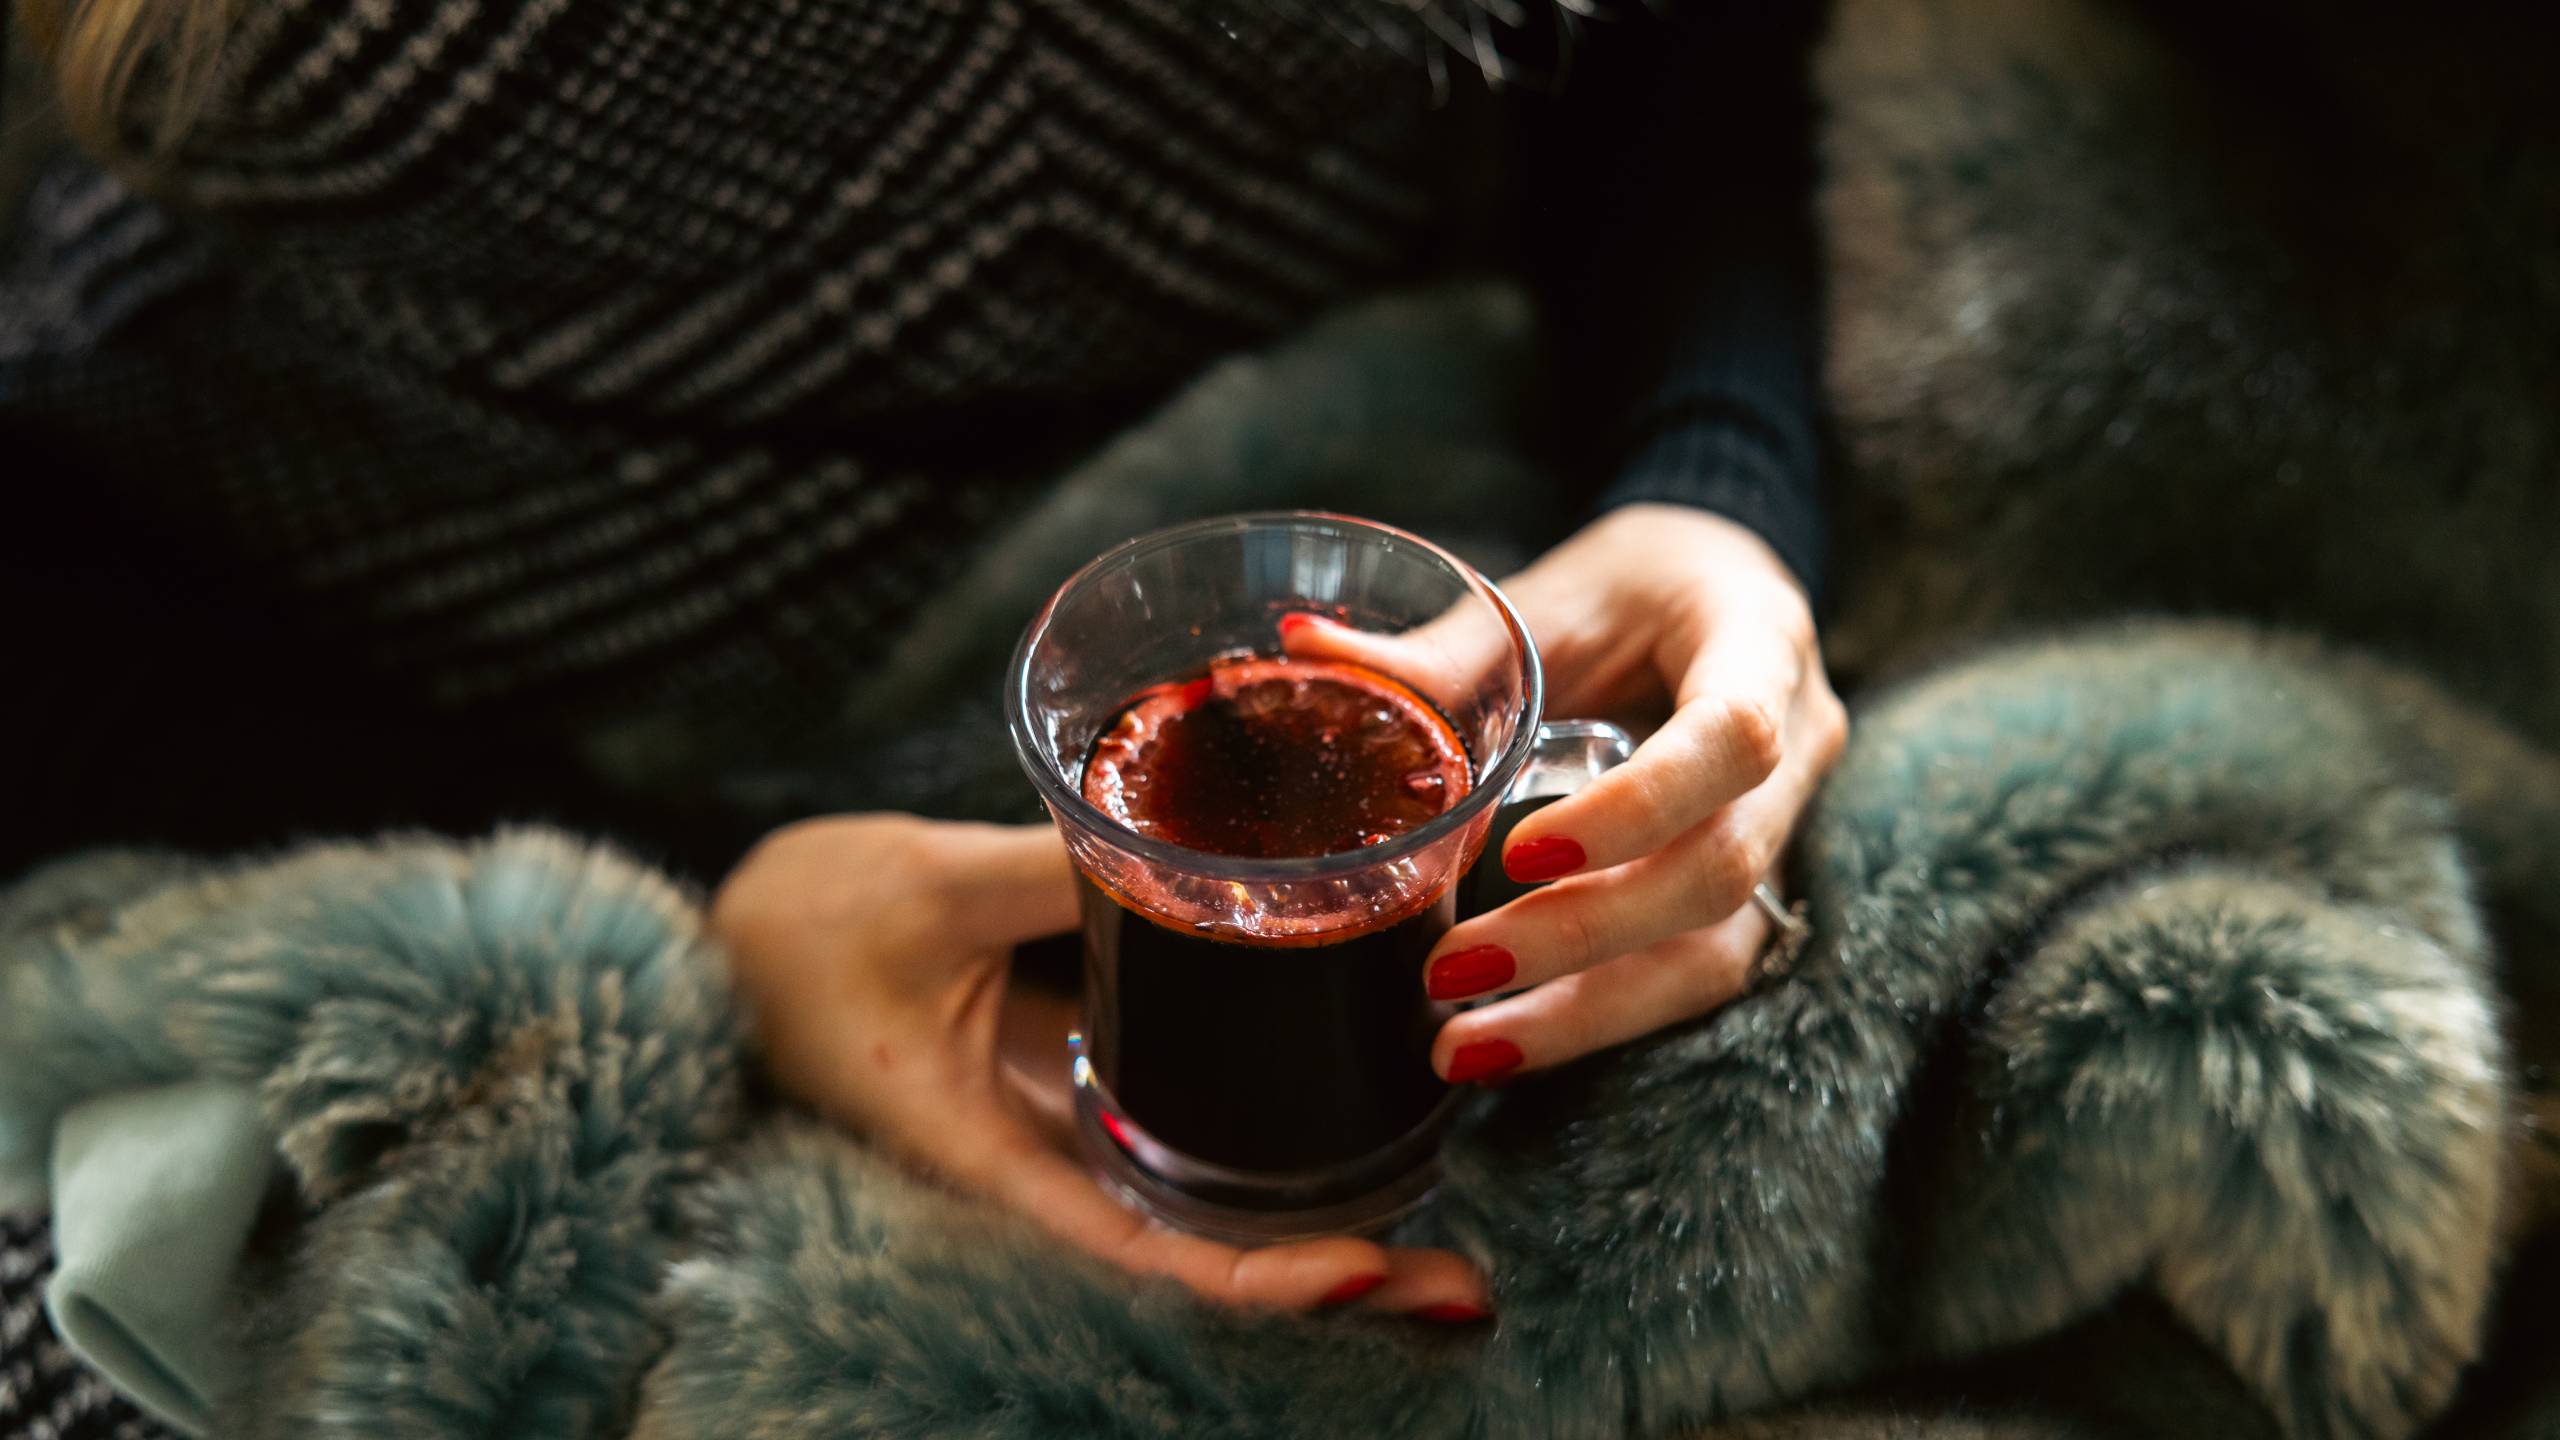 https://www.virginwines.co.uk/hub/wp-content/uploads/2023/11/Woman-enjoying-a-glass-of-mulled-wine-on-the-sofa-to-represent-Christmas-mulled-wine-recipe.jpg